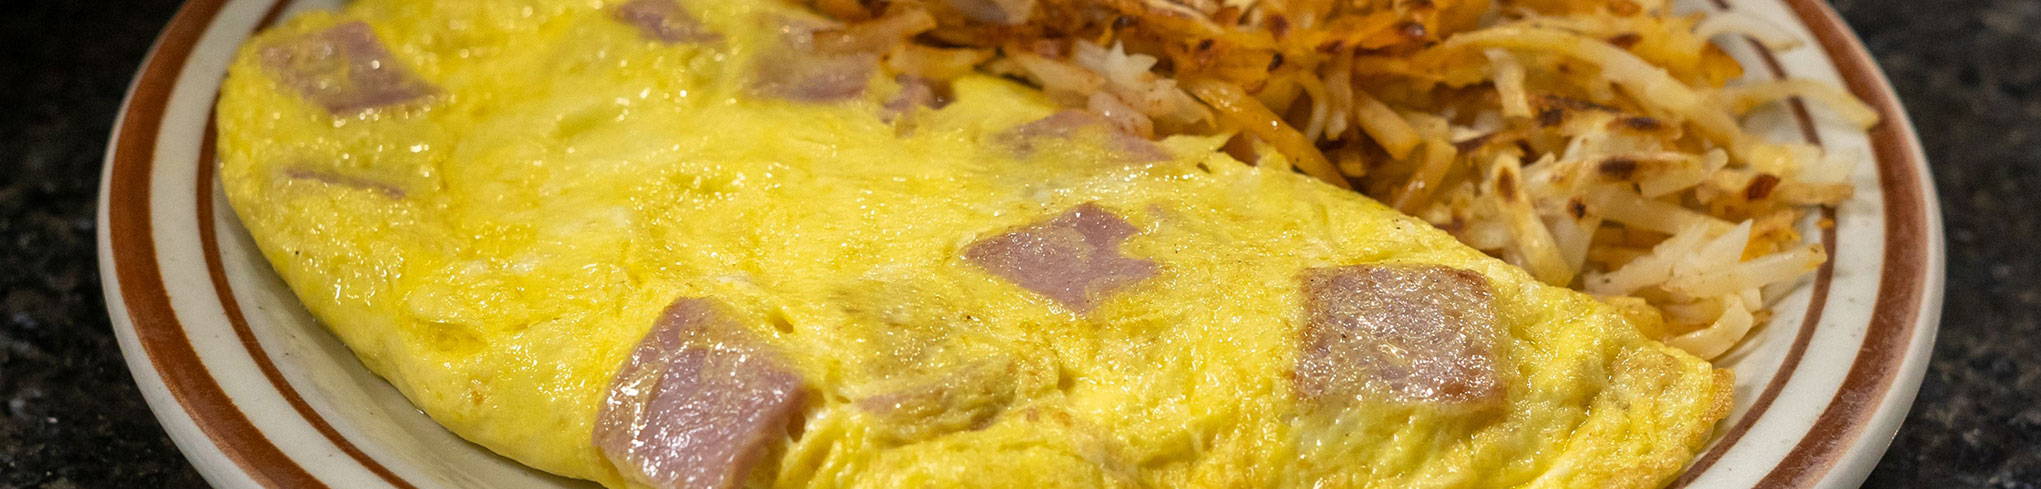 Omelet with ham and hashbrowns